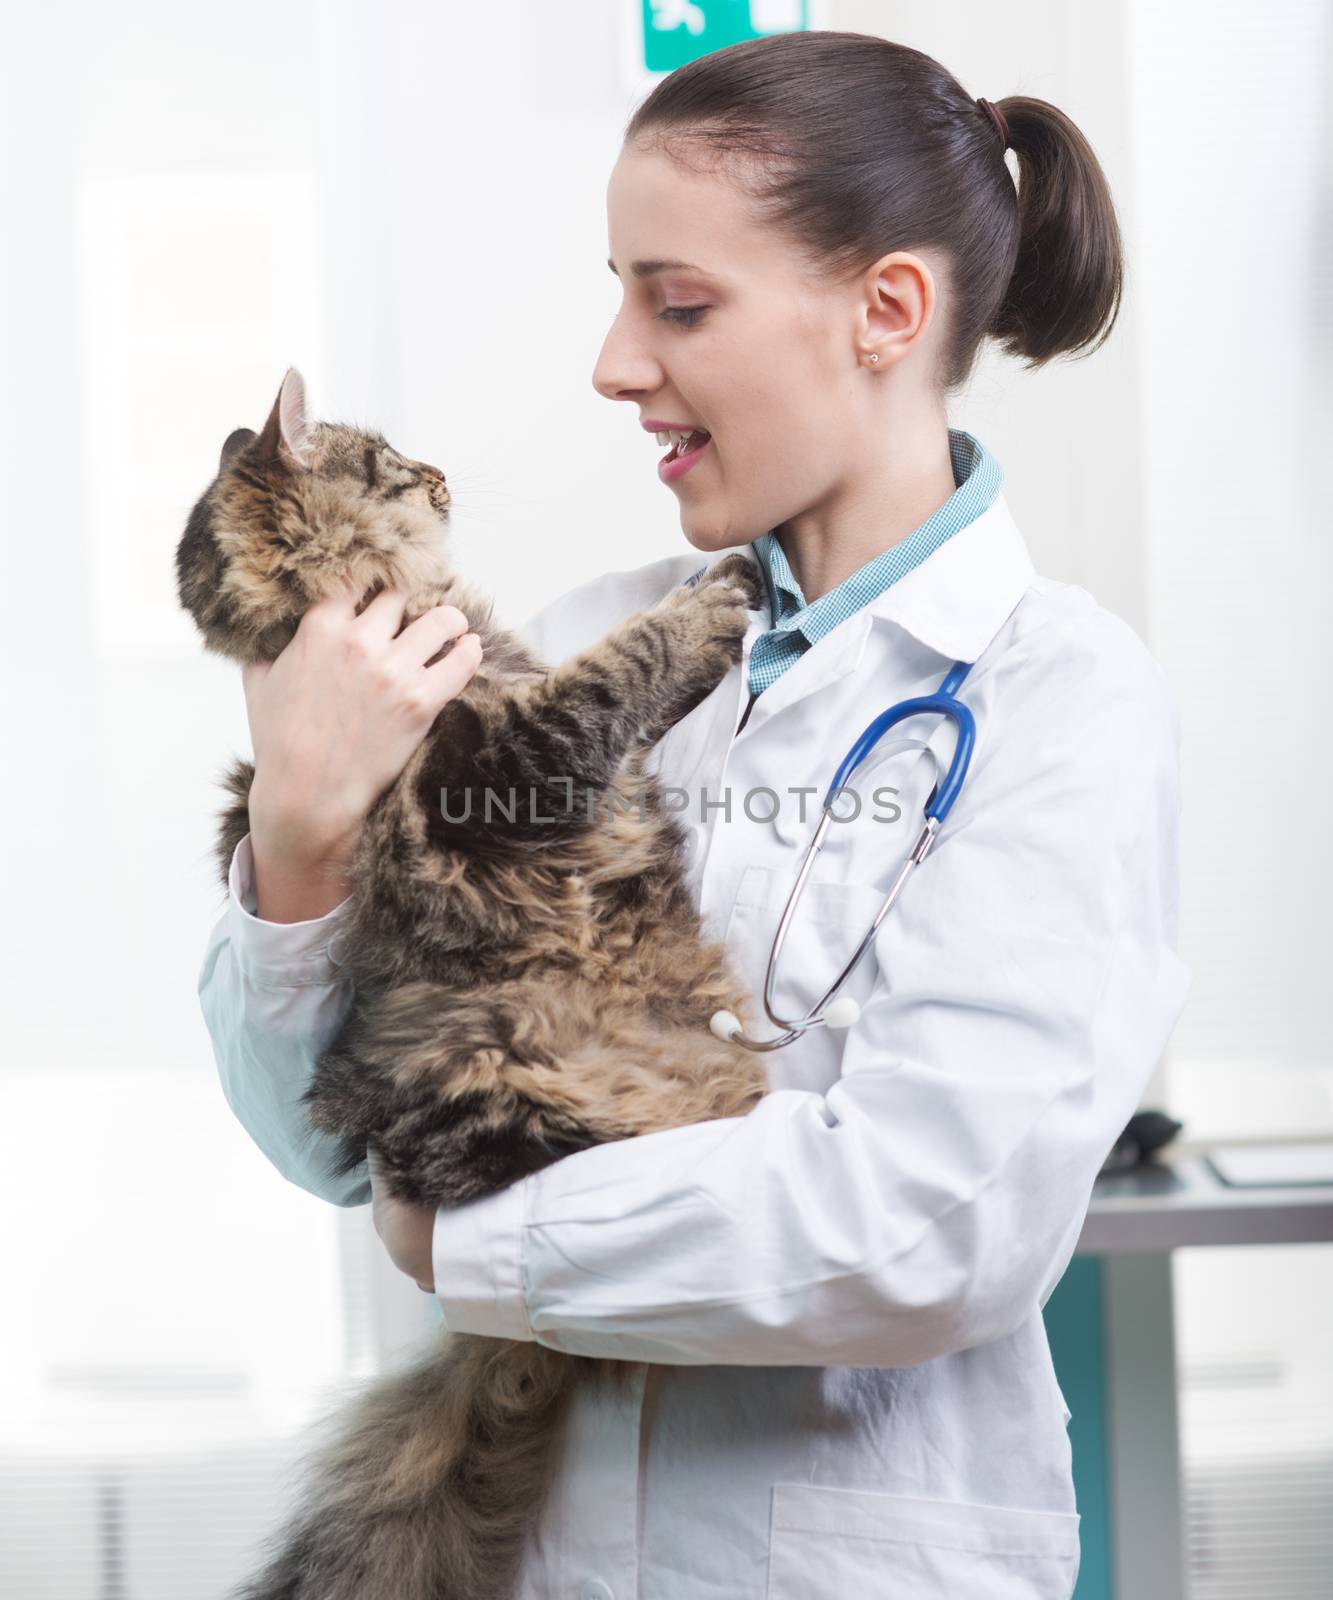 Veterinarian and Cat by stokkete